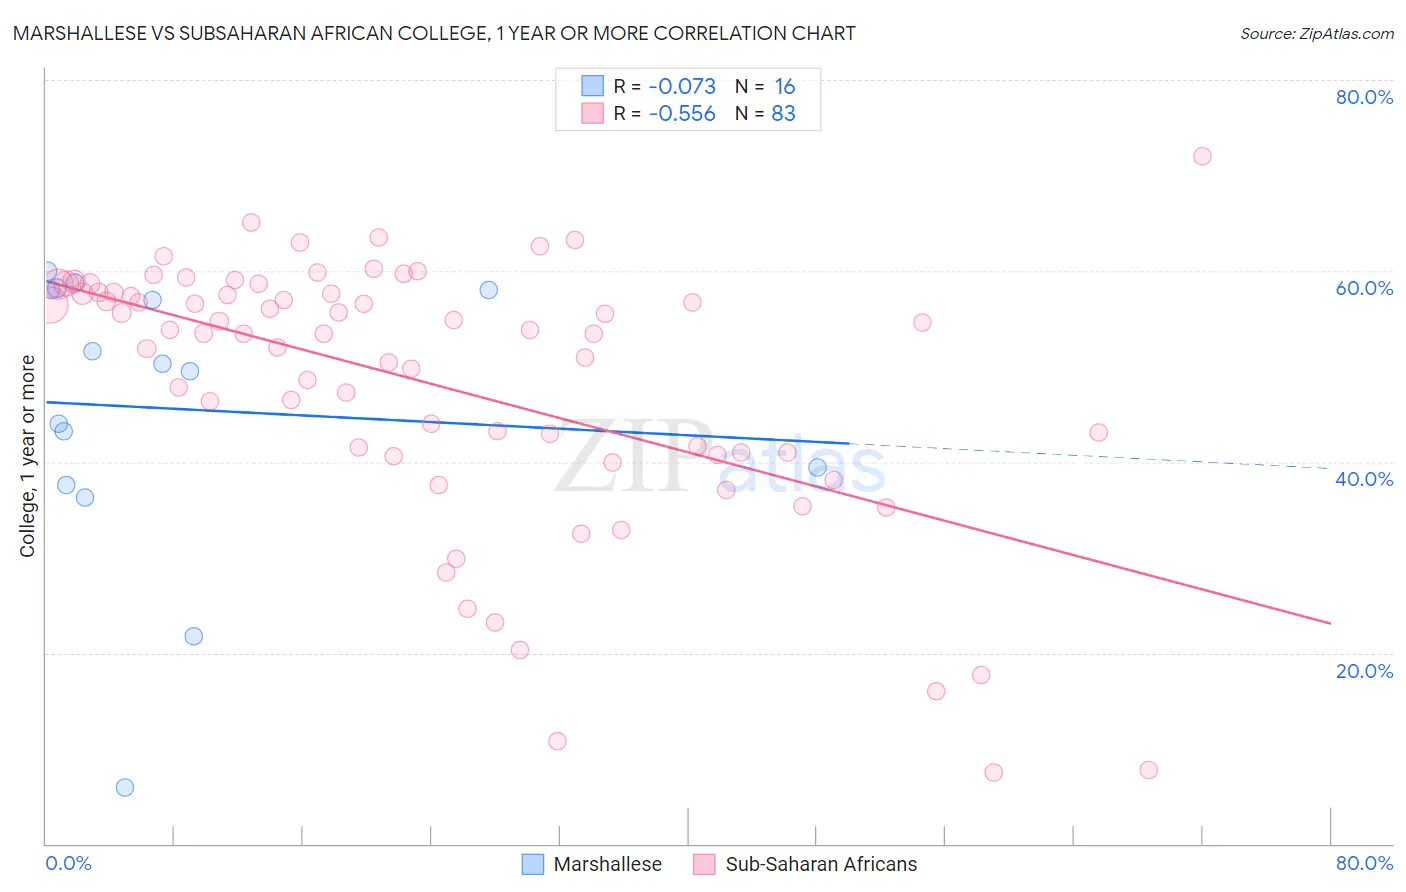 Marshallese vs Subsaharan African College, 1 year or more